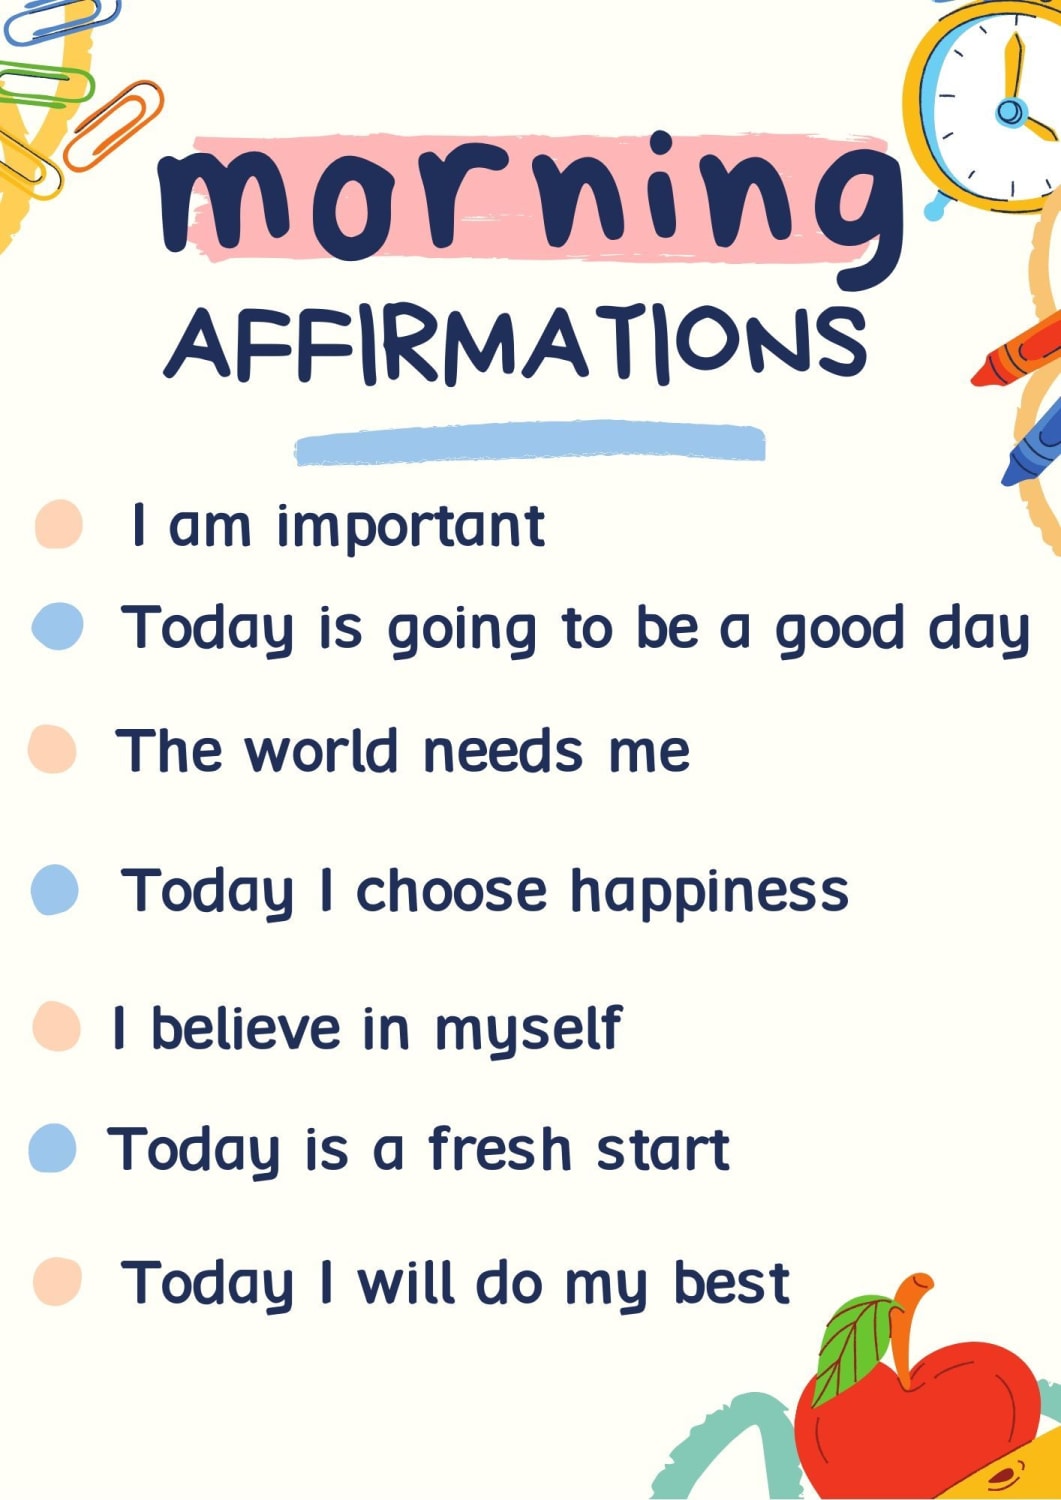 10ions5 morning affirmations